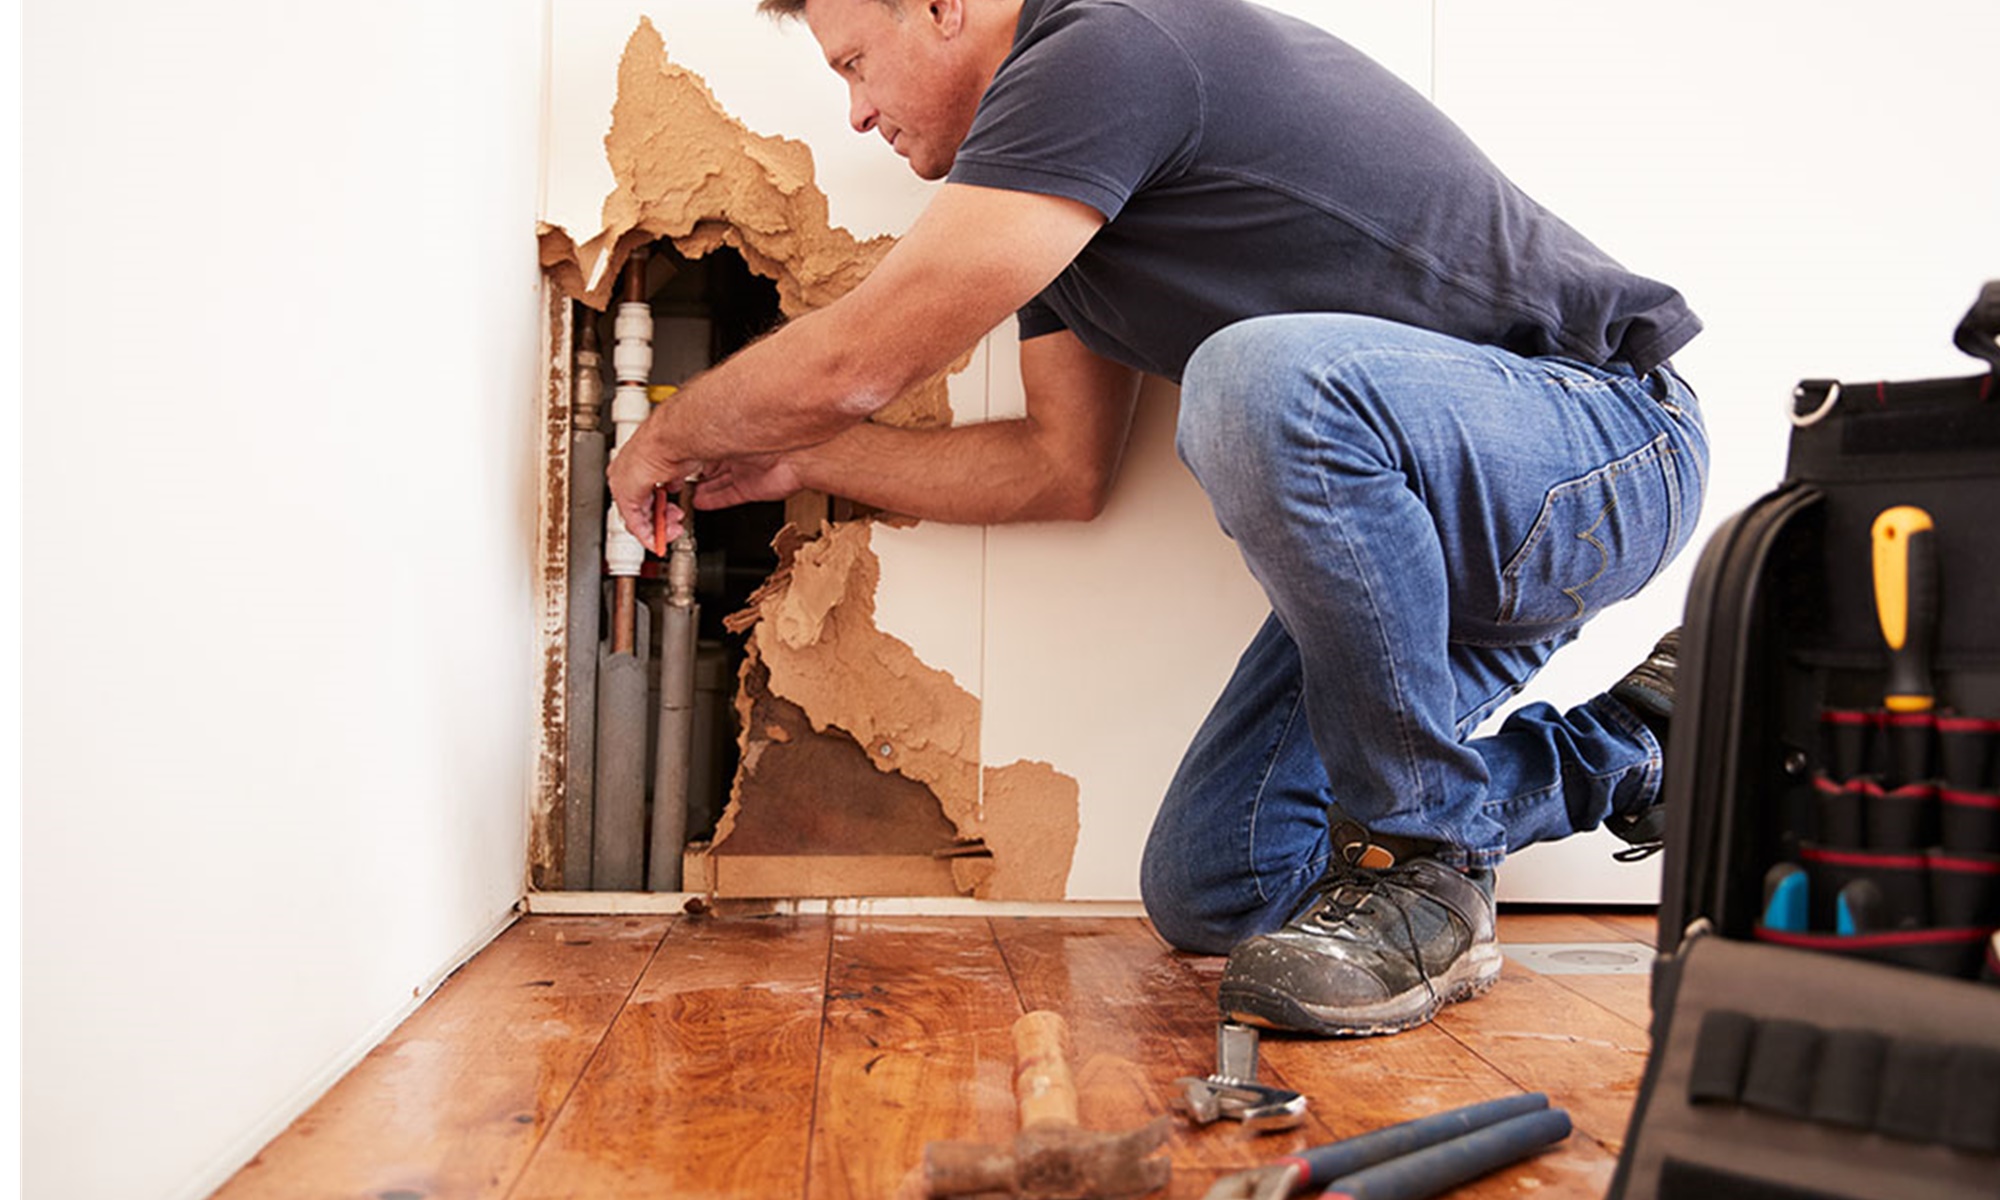 From the Tool belt to the Home Office: Handyman is the New Jack of All Trades